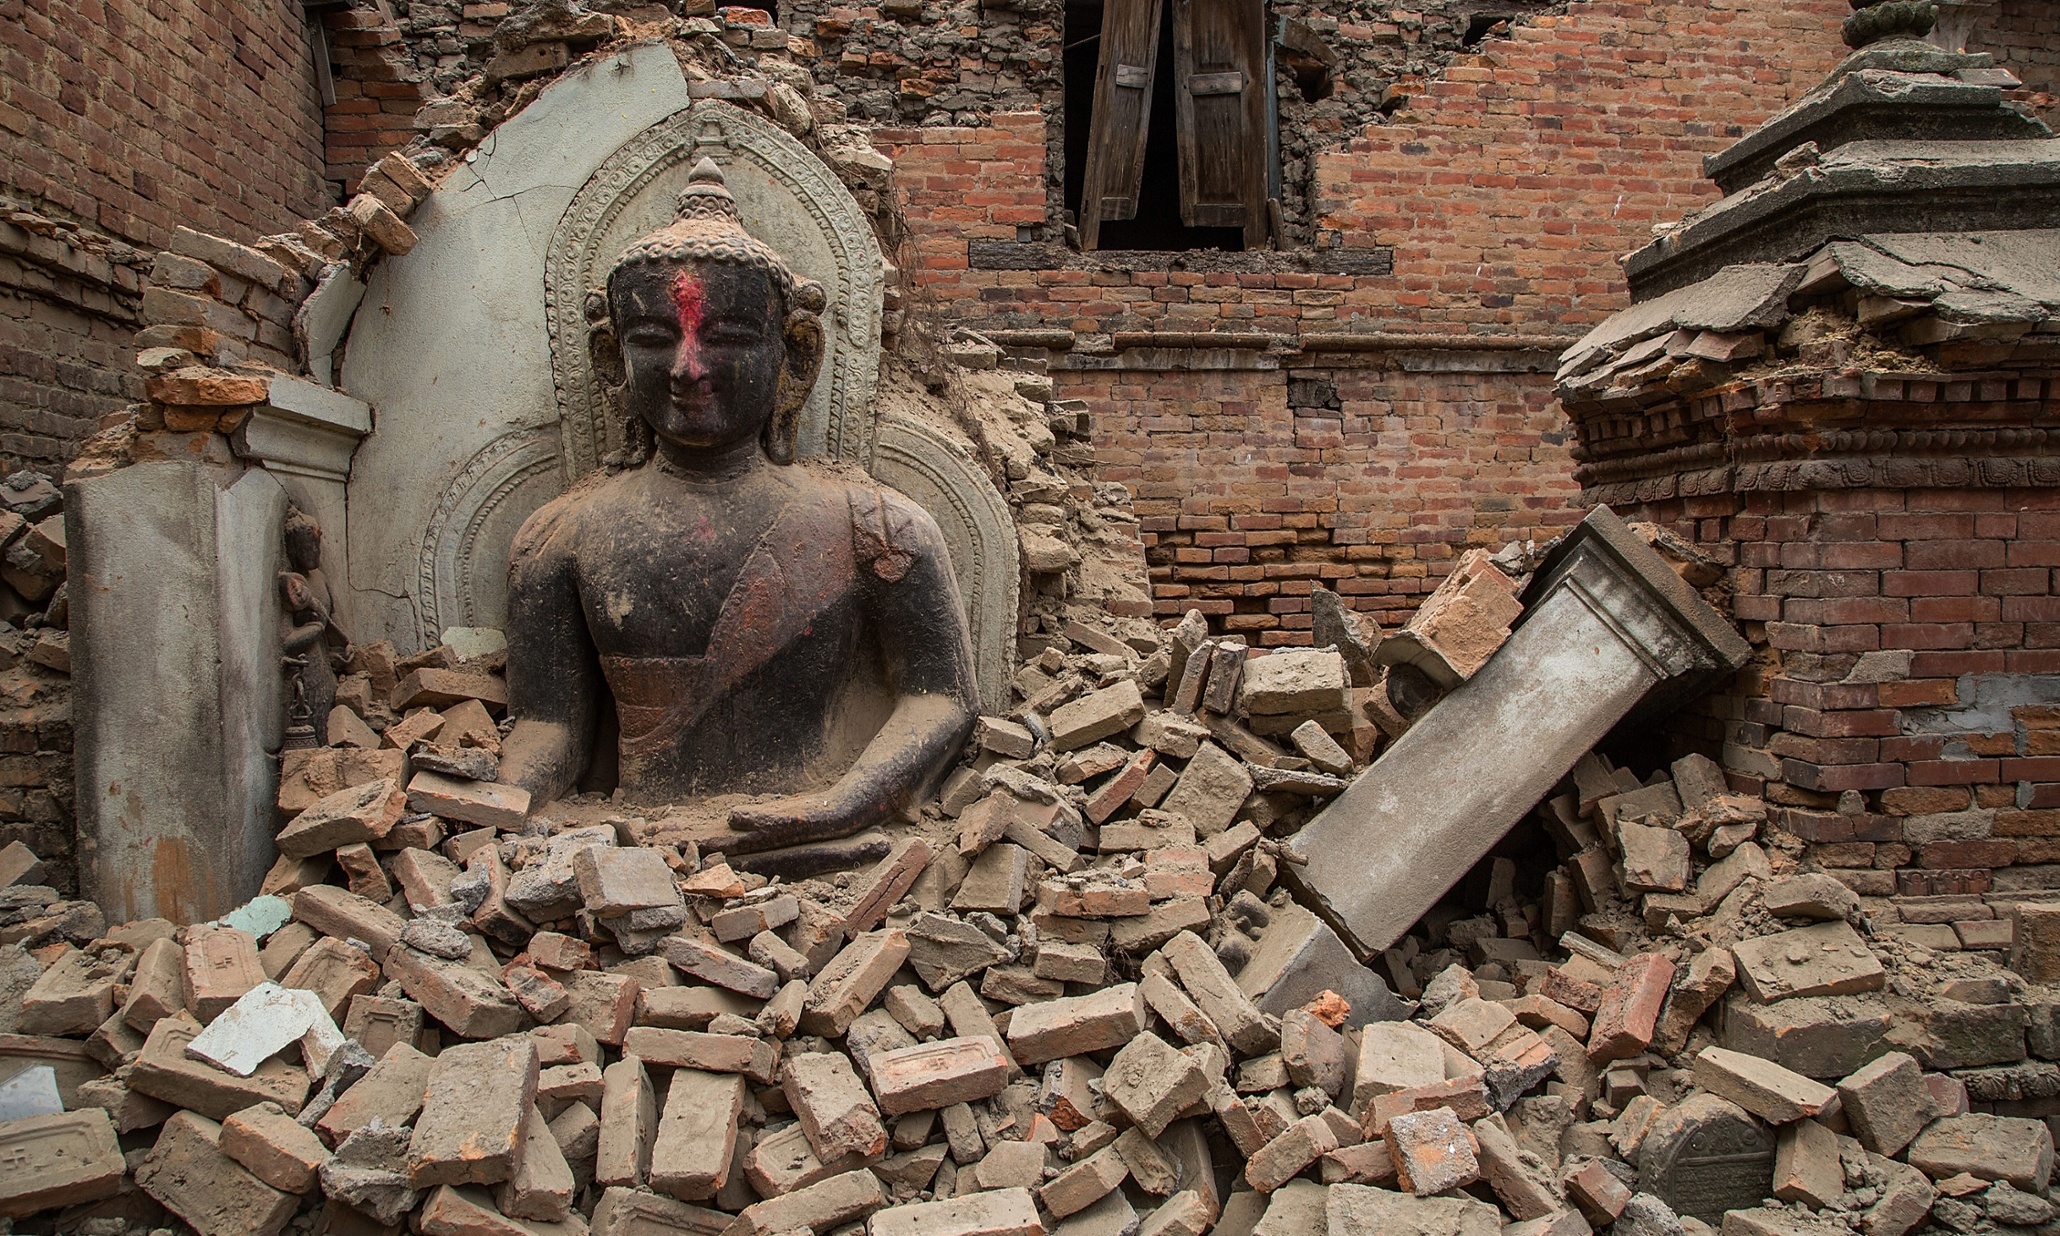 Nepal earthquake: rescue continues as death toll exceeds 2,500 – the day's updates